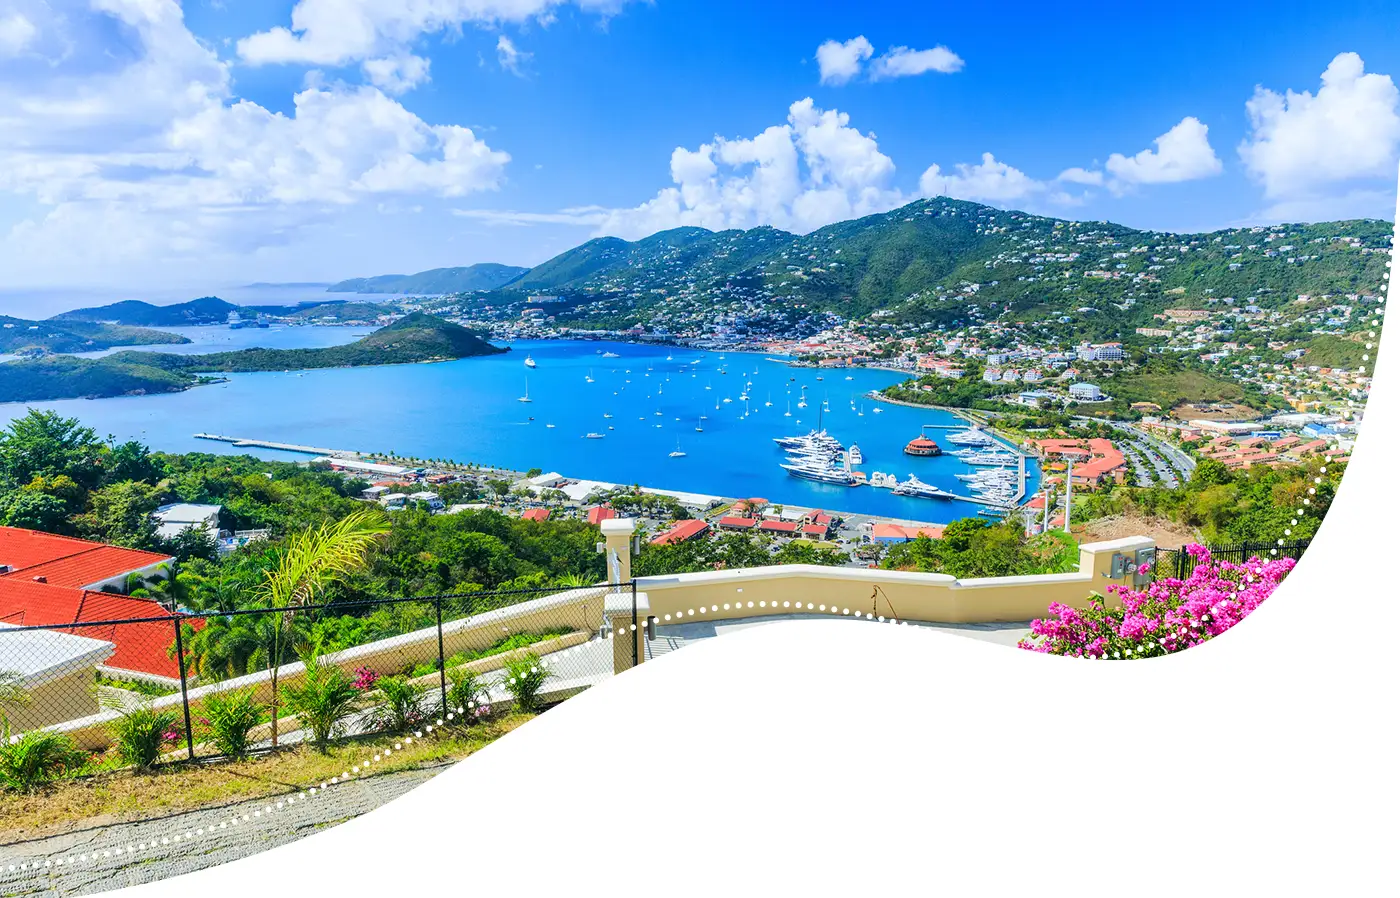 Panoramic view of St. Thomas in the Caribbean.